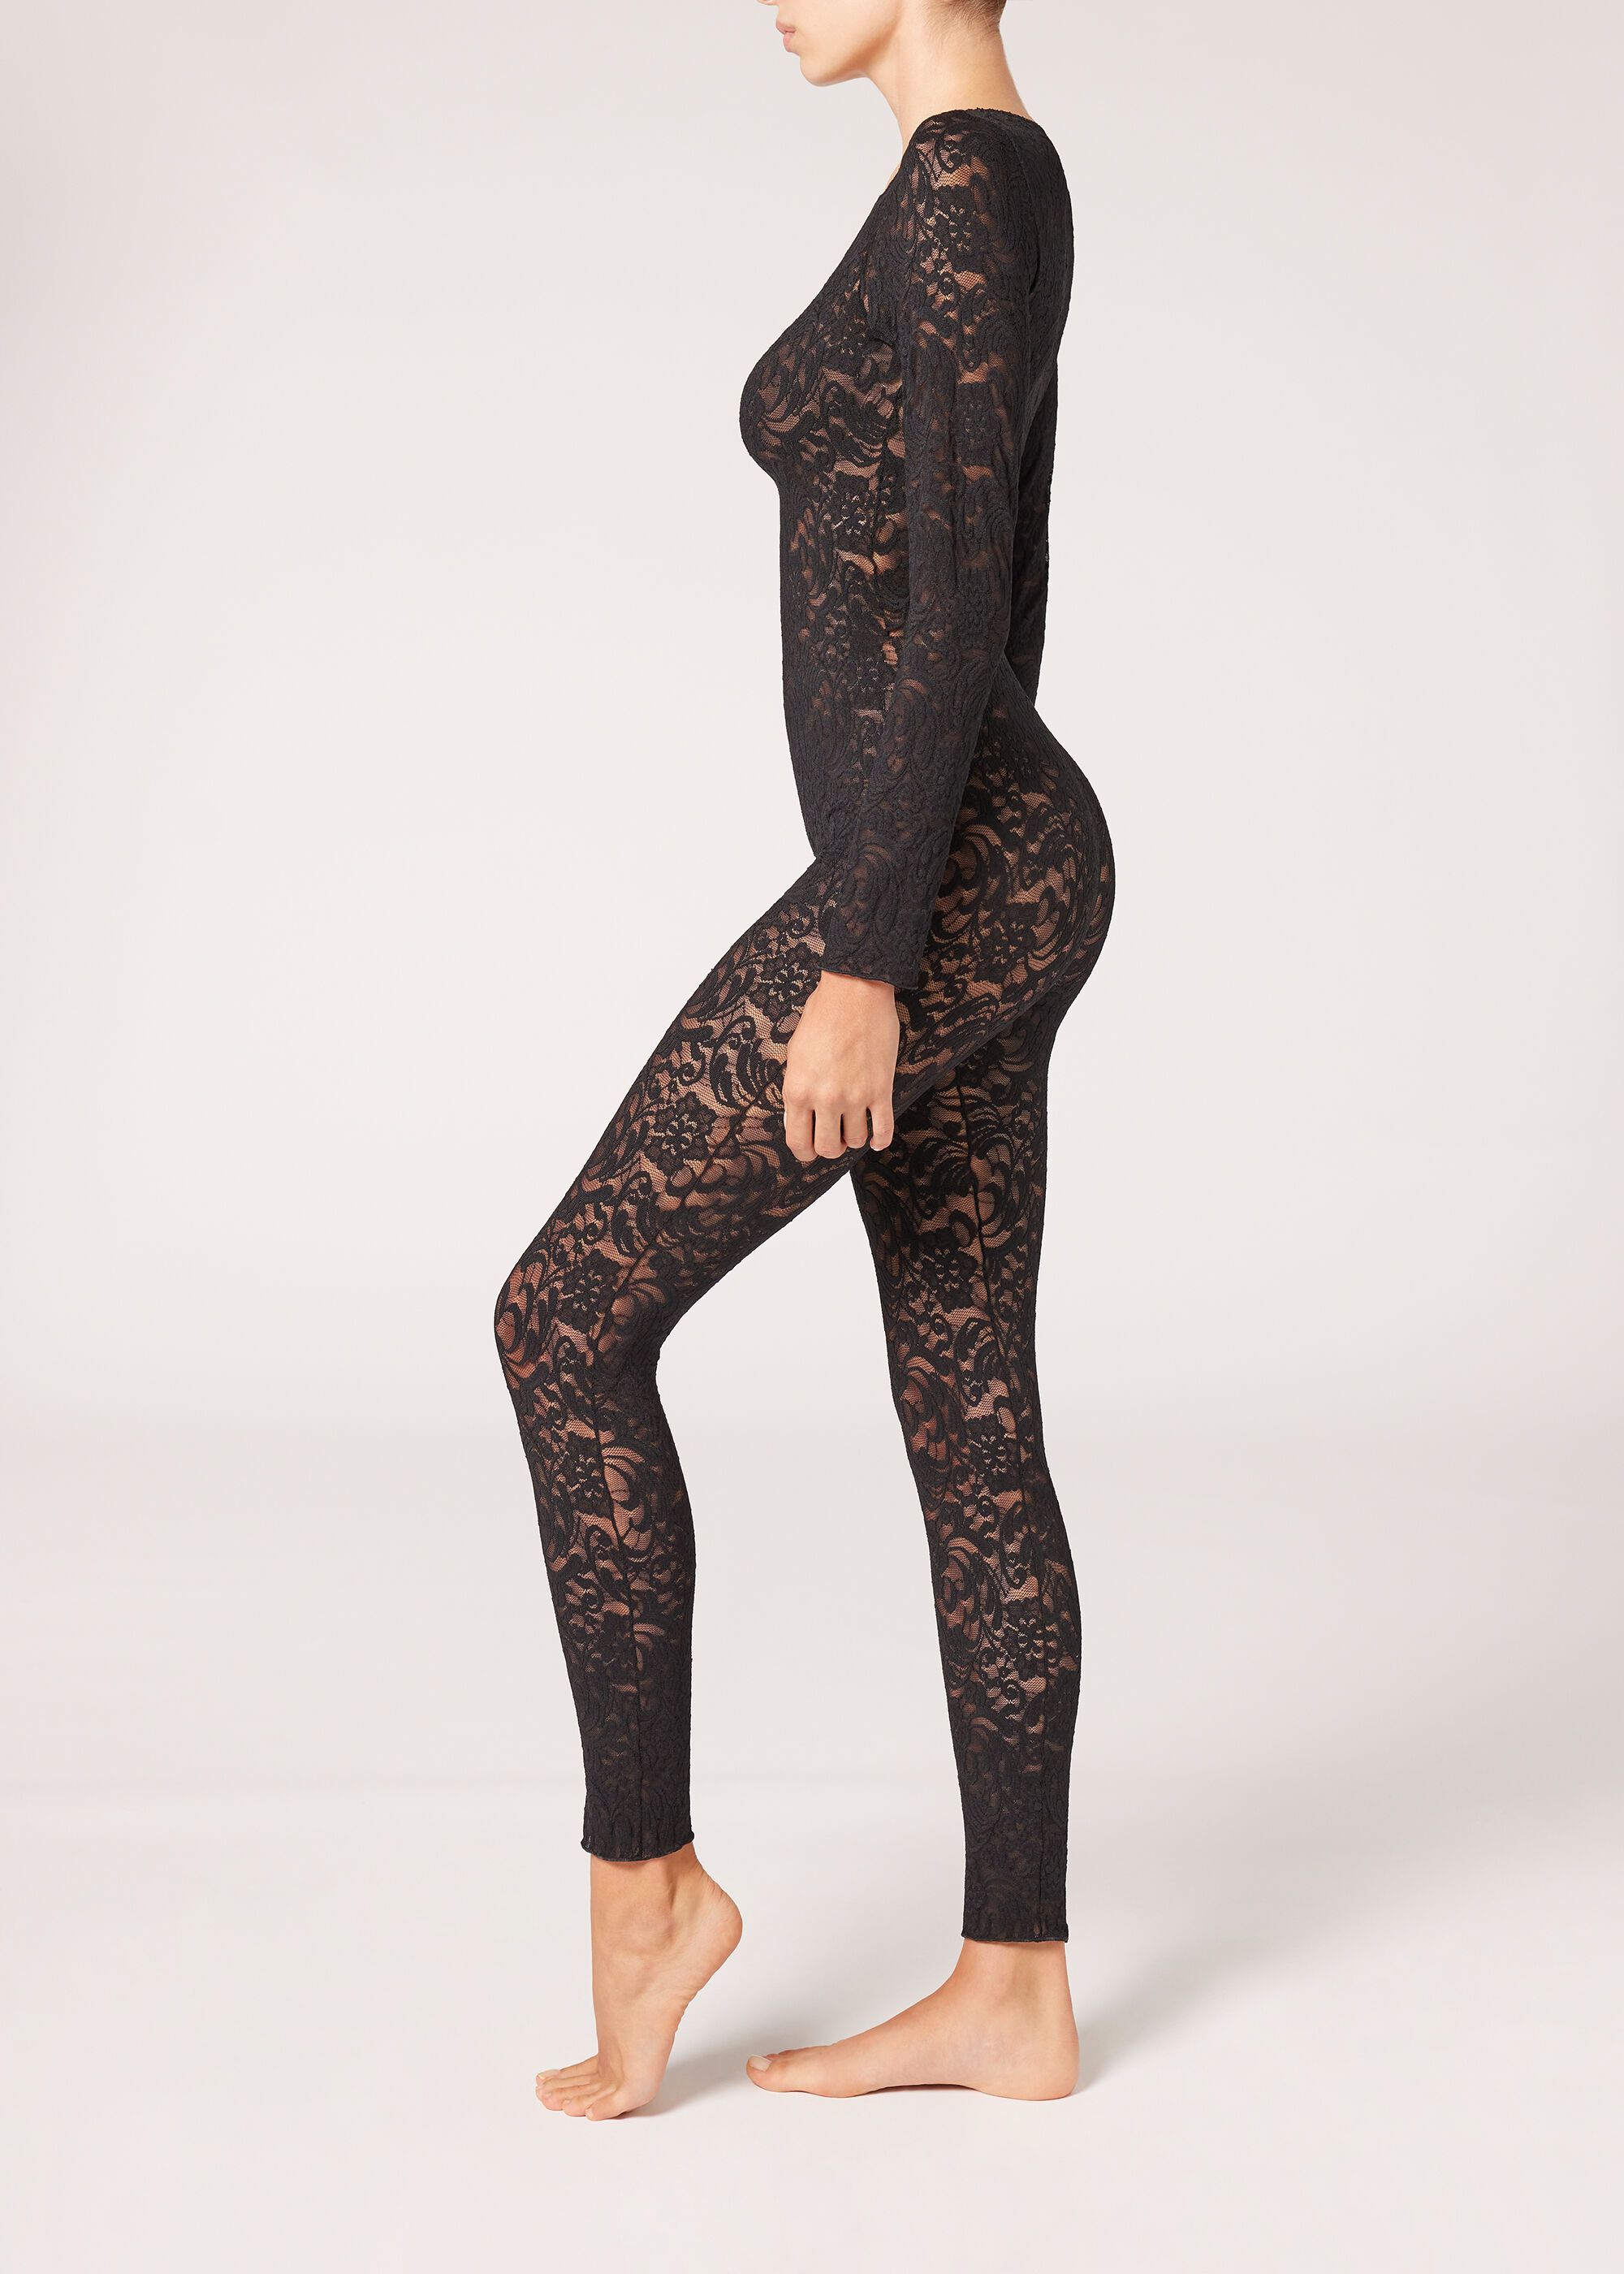 Skinny Floral Lace Full Body Tights | Calzedonia US